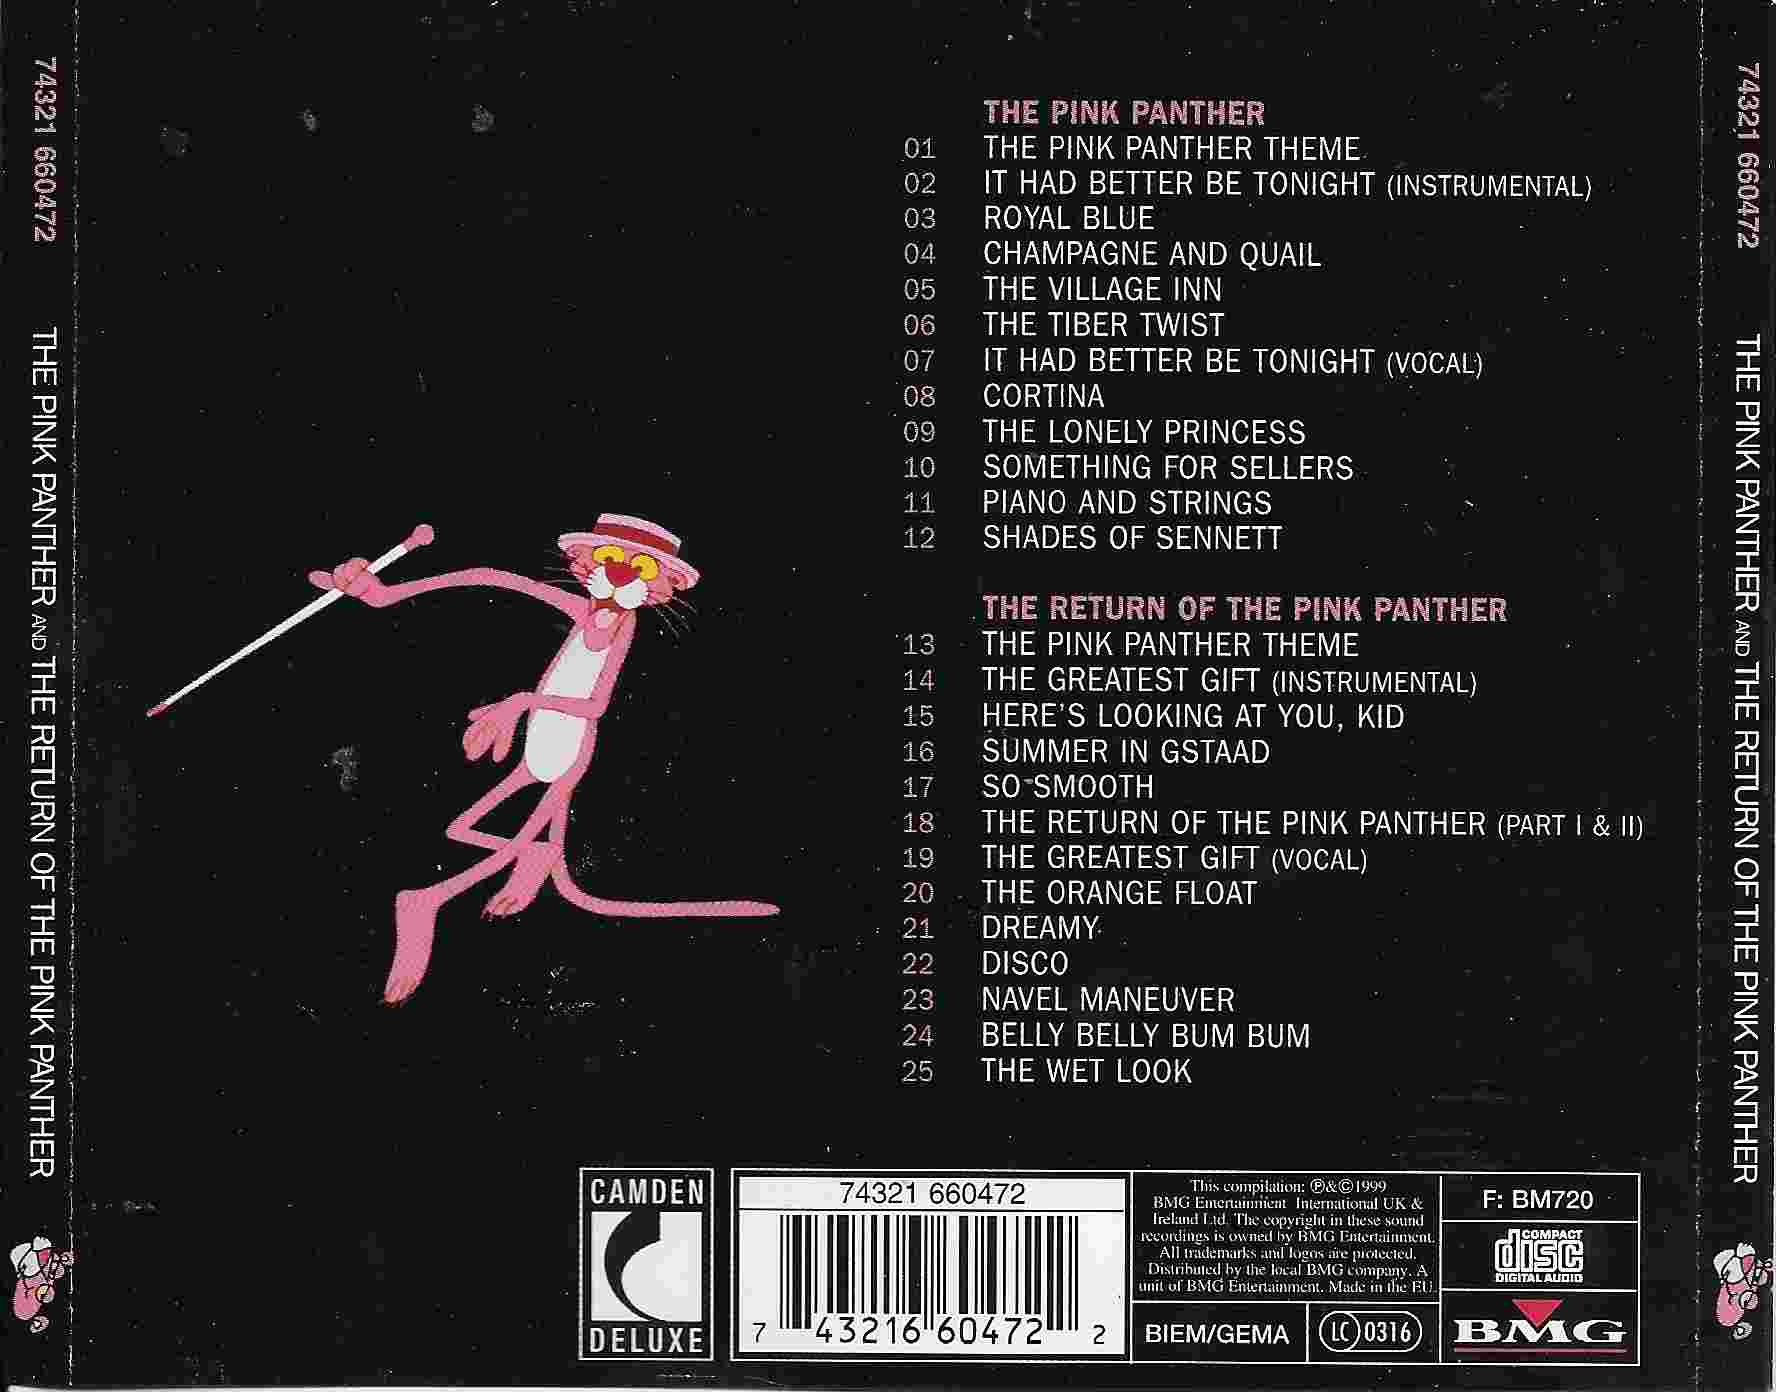 Picture of BM 720 The Pink Panther / The return of the Pink Panther by artist Henry Mancini from ITV, Channel 4 and Channel 5 library